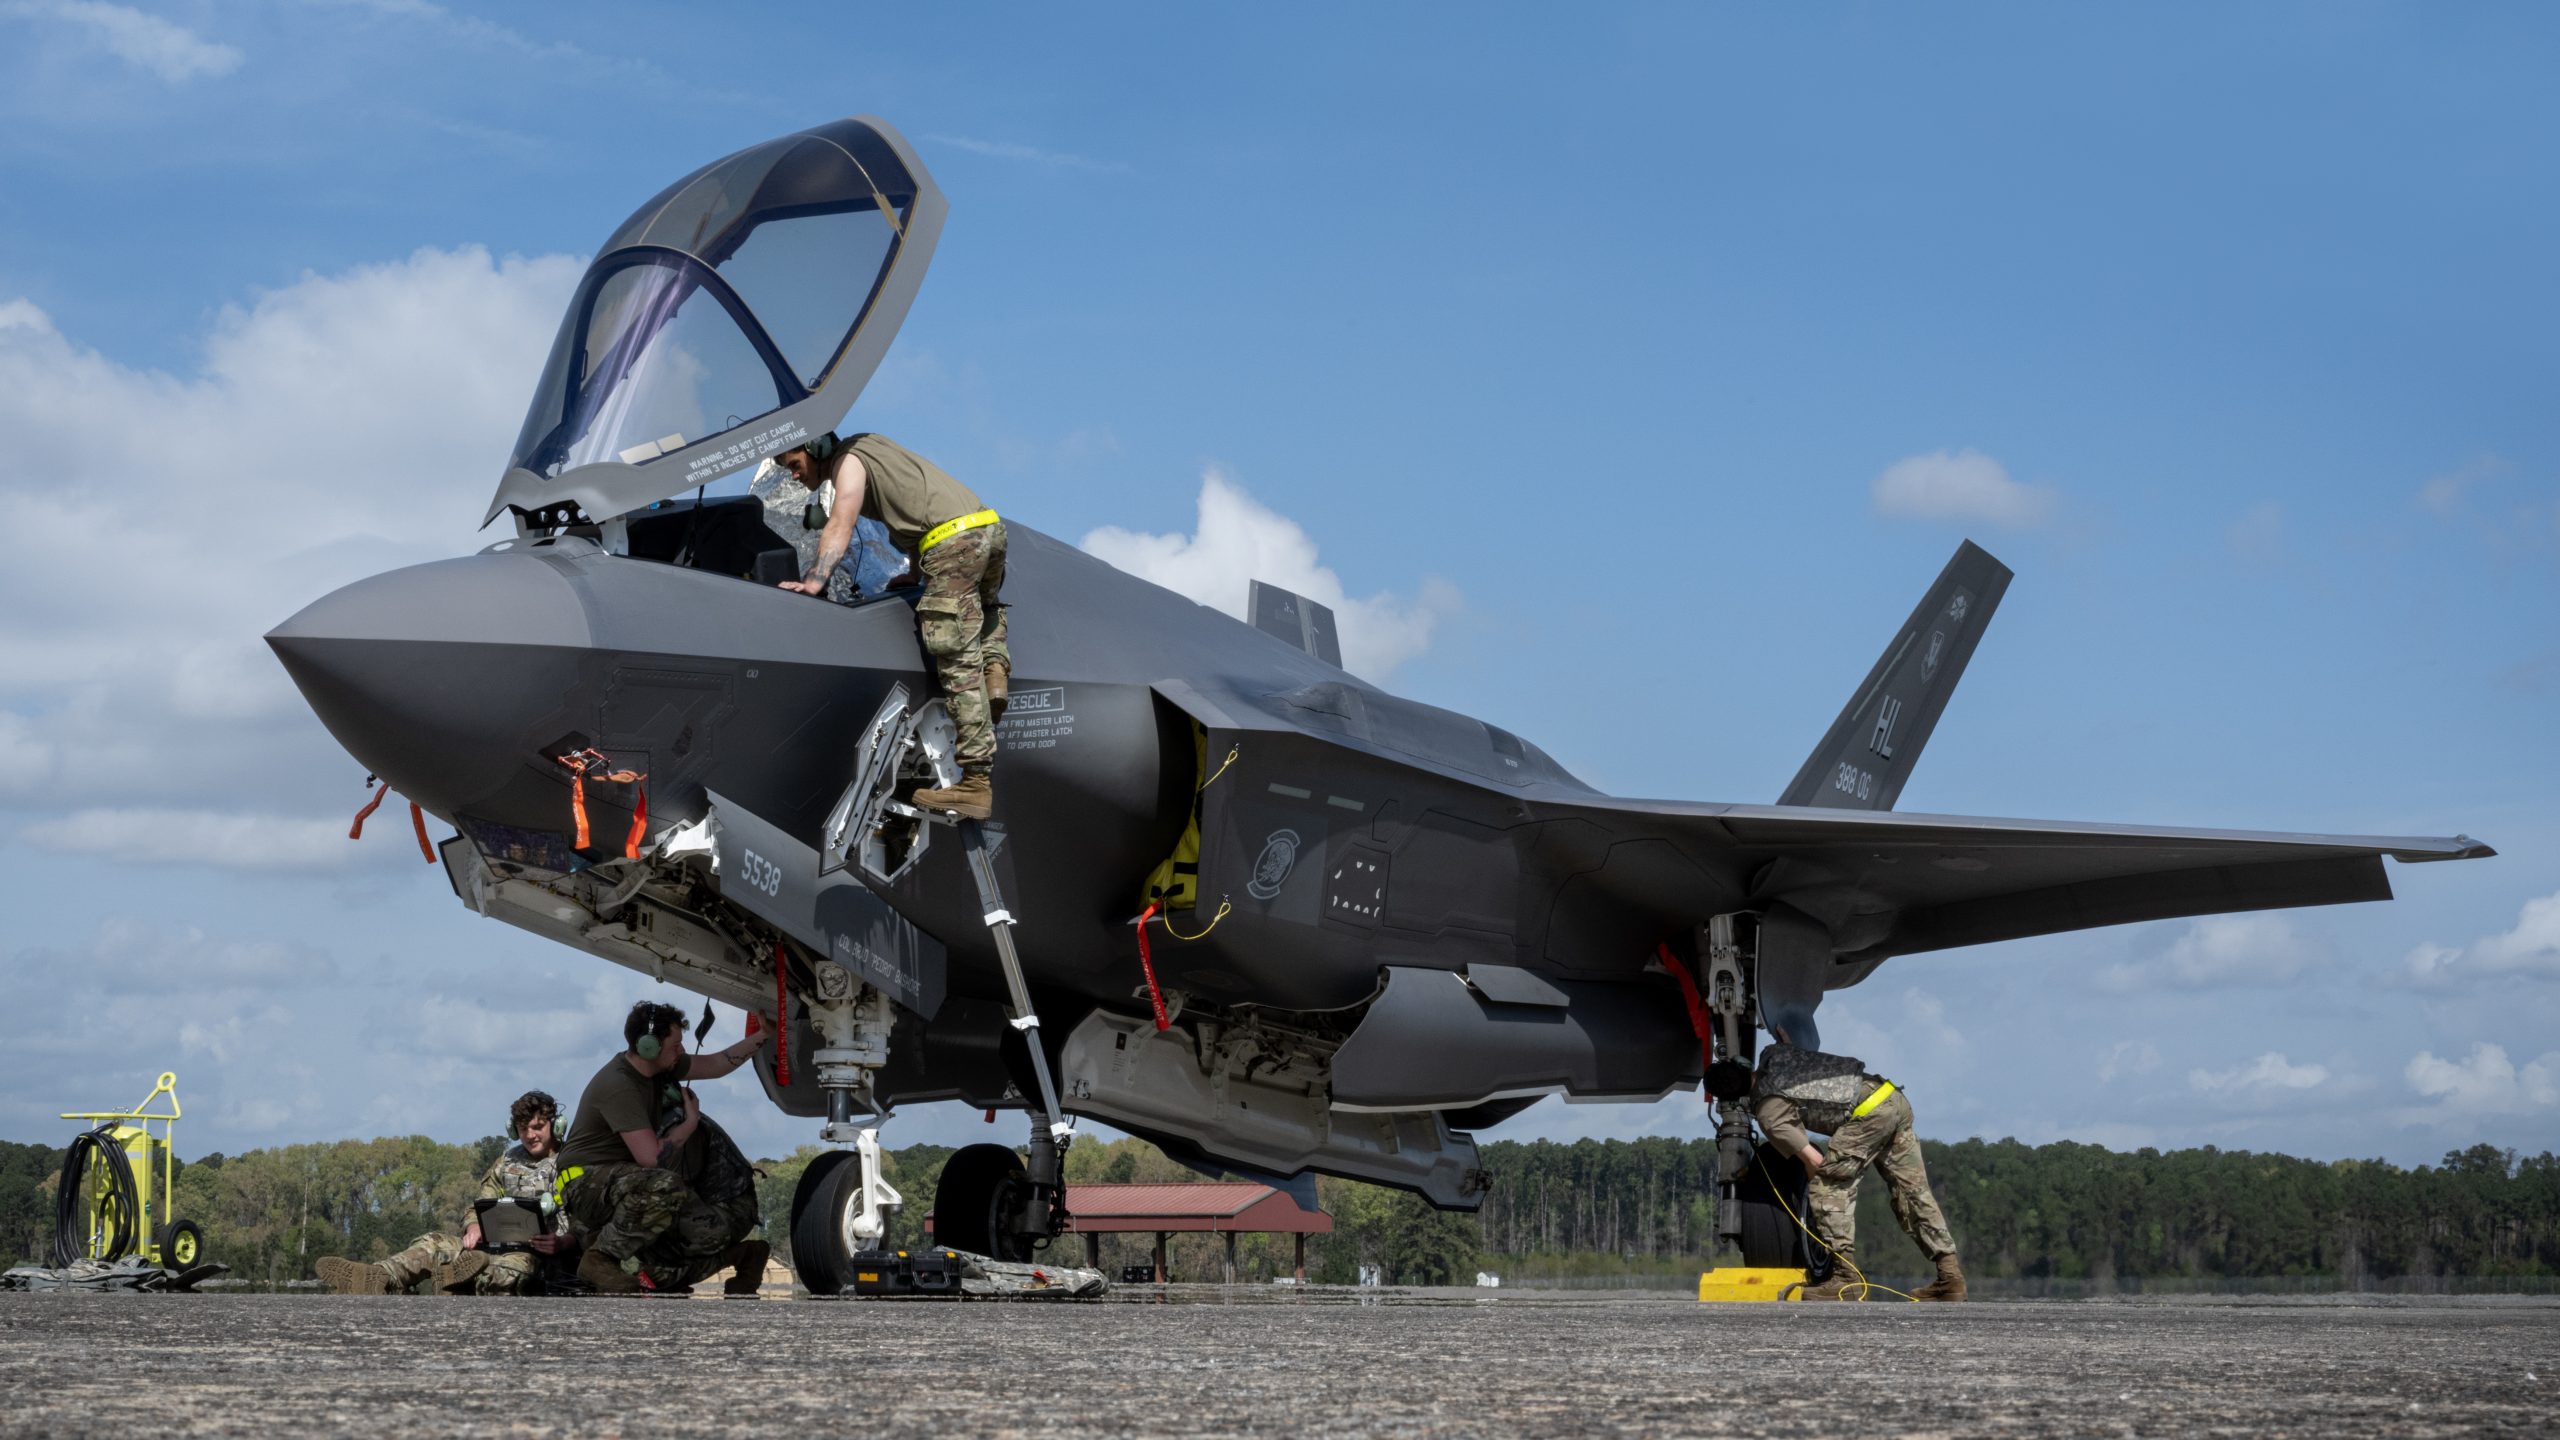 New Report: ‘Vital Time’ for Pentagon to Chart the Way forward for F-35 Sustainment